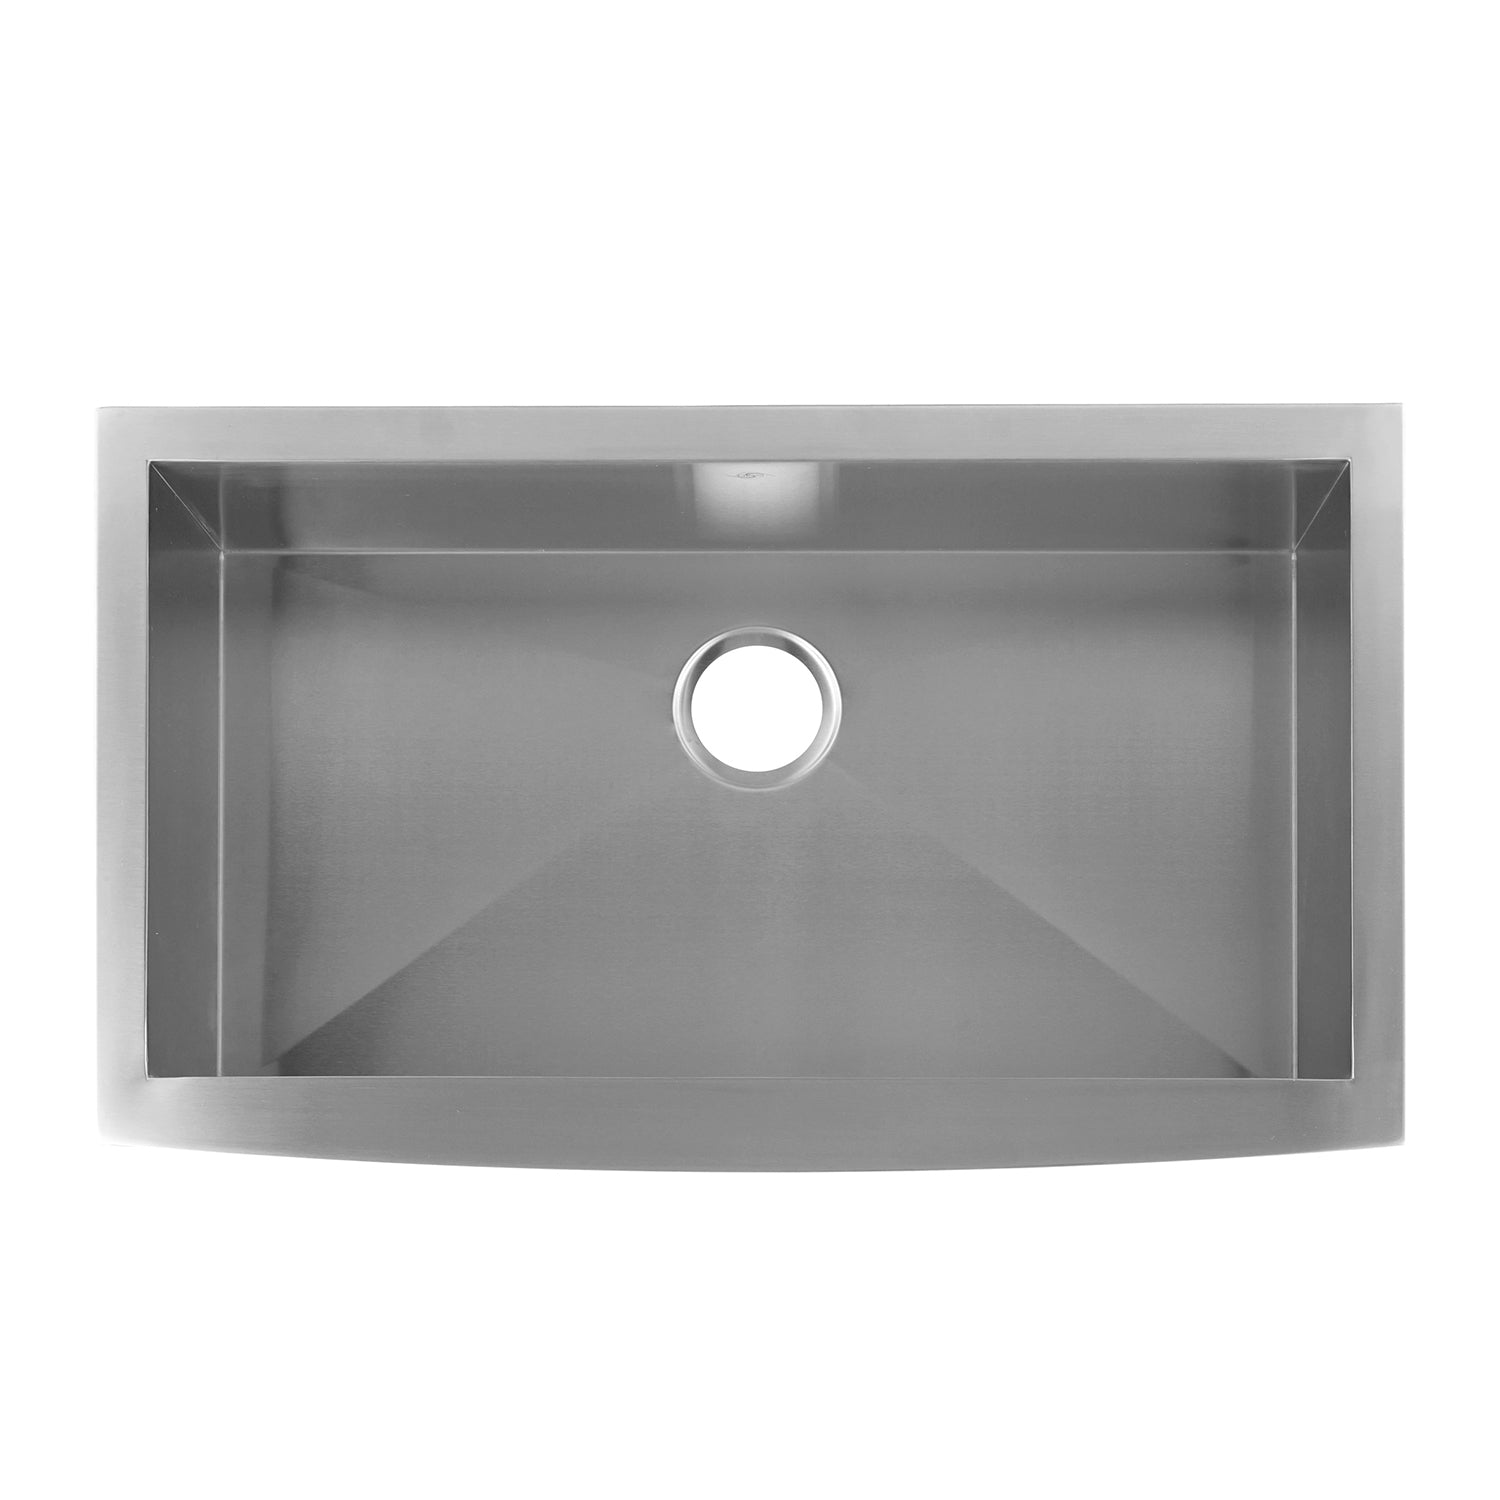 DAX Farmhouse Kitchen Sink, 16 Gauge Stainless Steel, Brushed Finish, 32-7/8 x 20 x 10 Inches (DAX-SQ-3321)